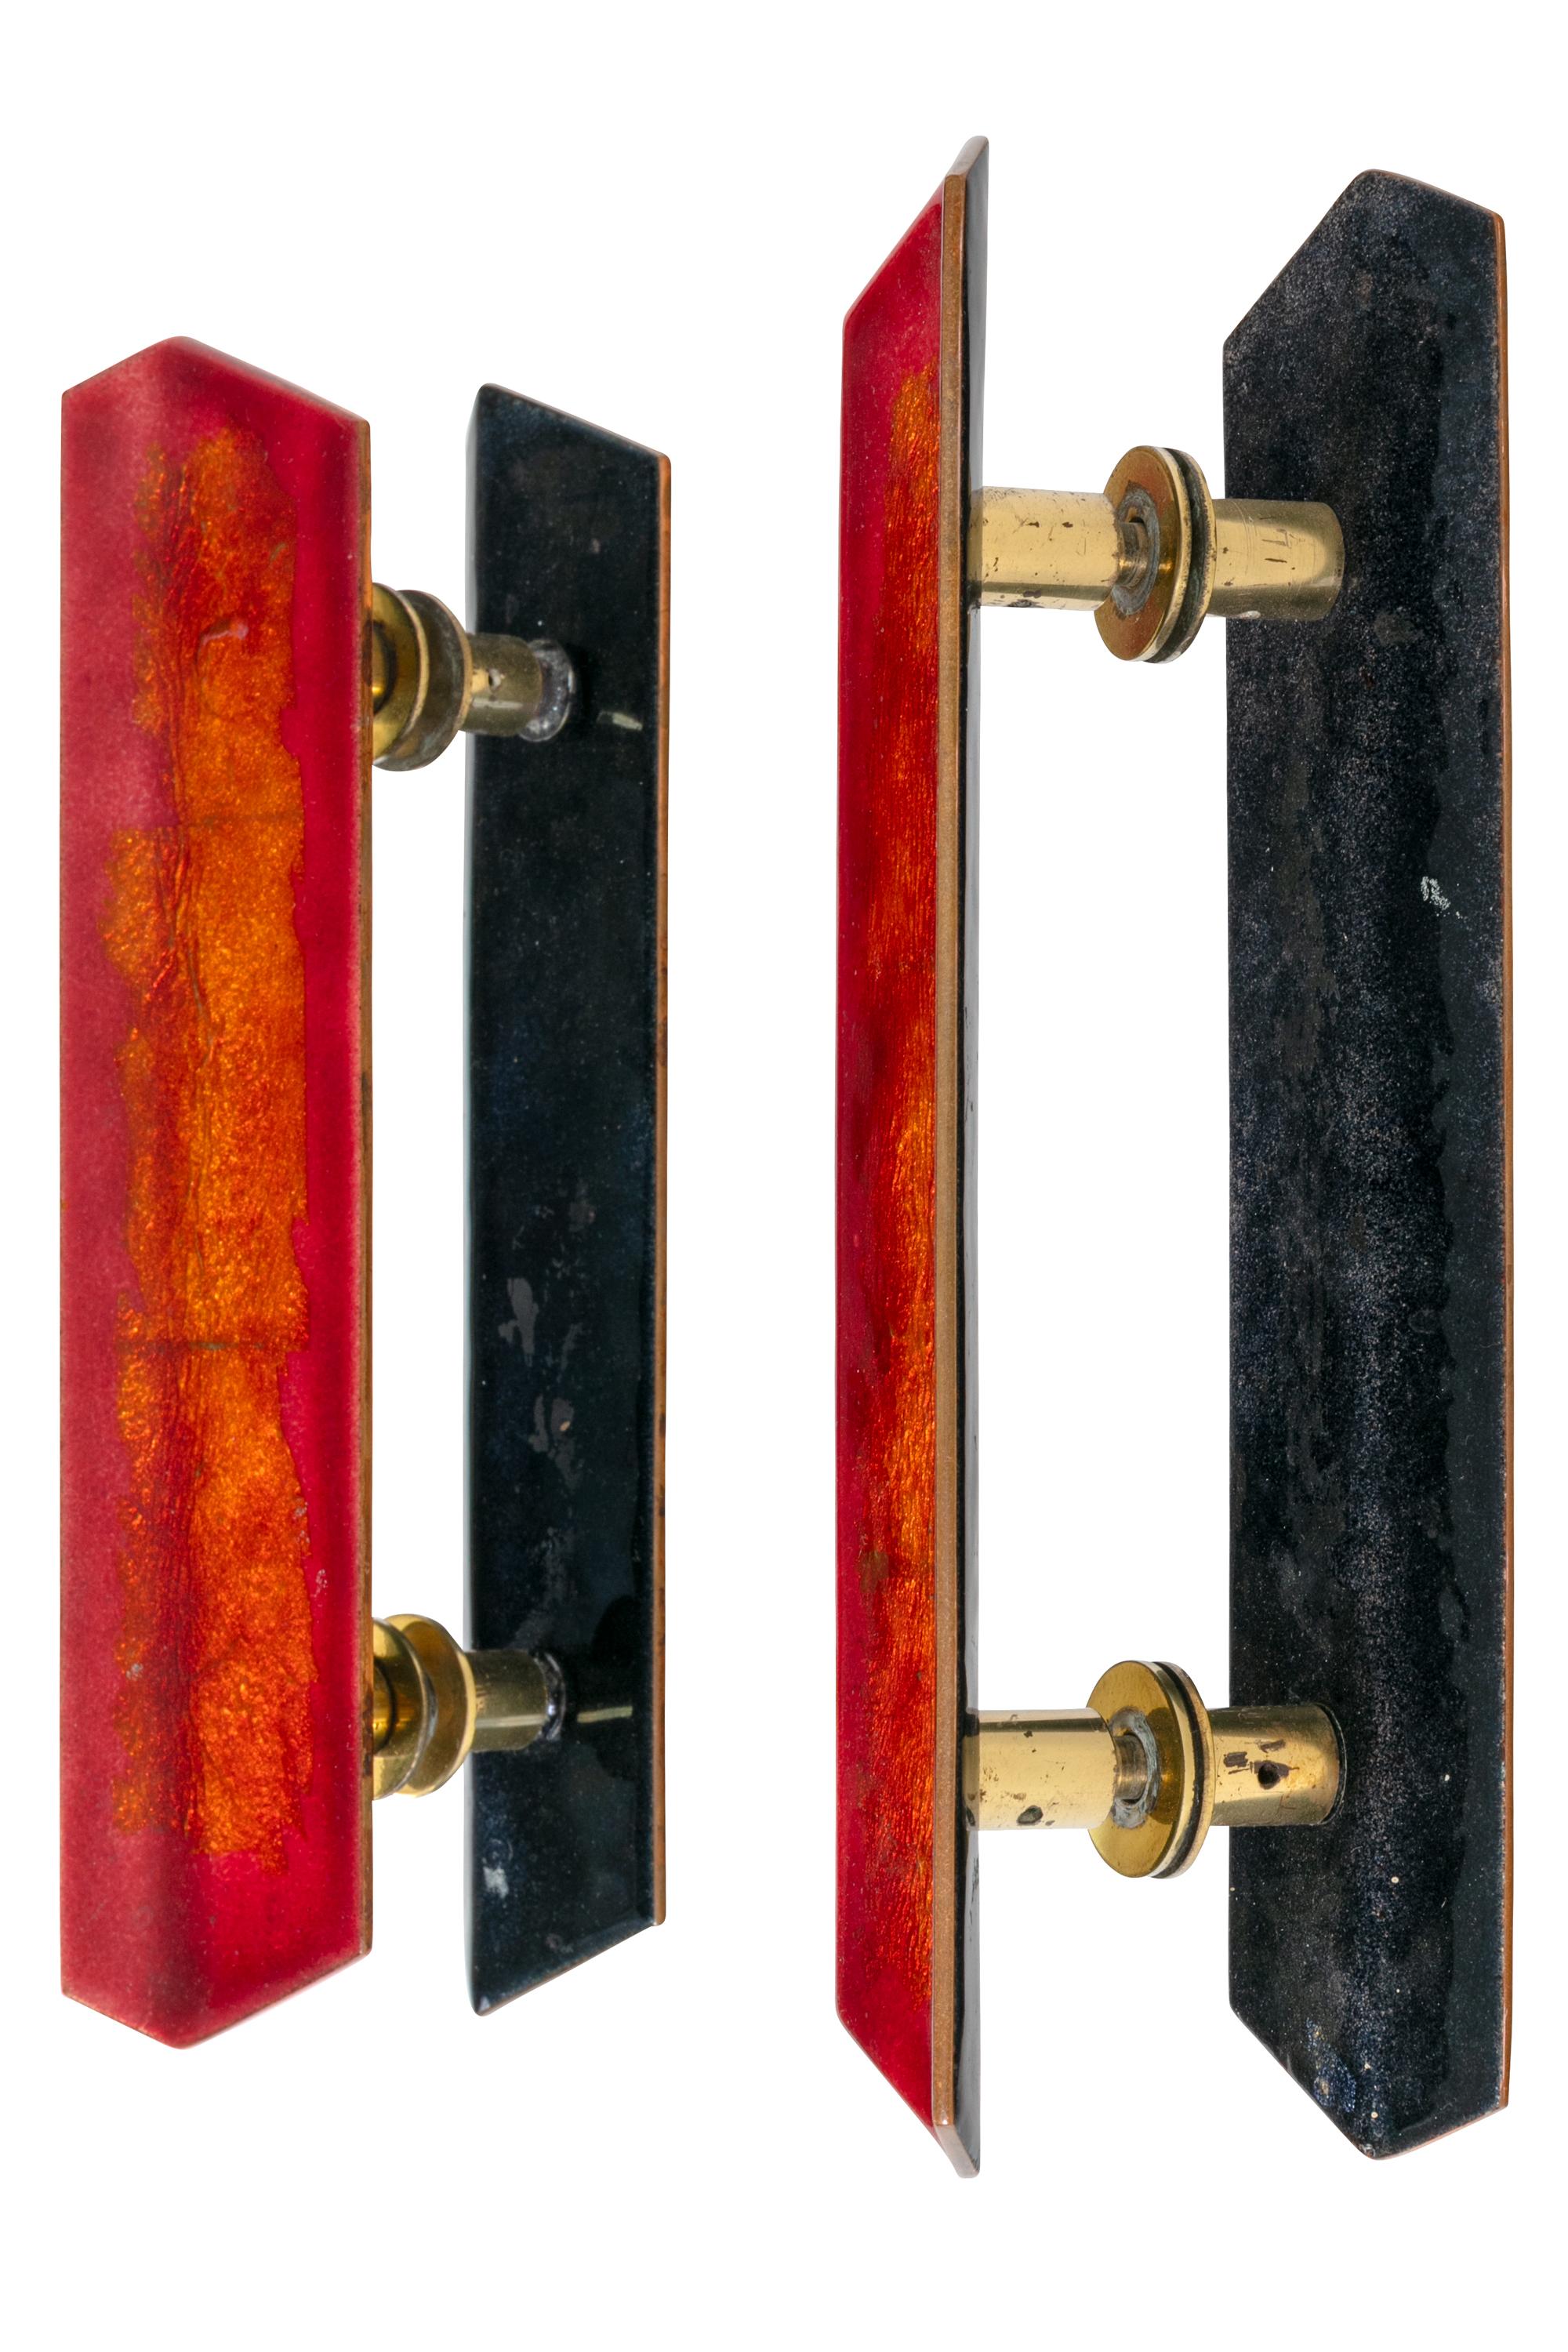 Paolo De Paol was an artisan as well and entrepreneur and designer. His enamel door pulls were so popular they were being commissioned in large quantity from many of the renown architects of the period including Gio Ponti.